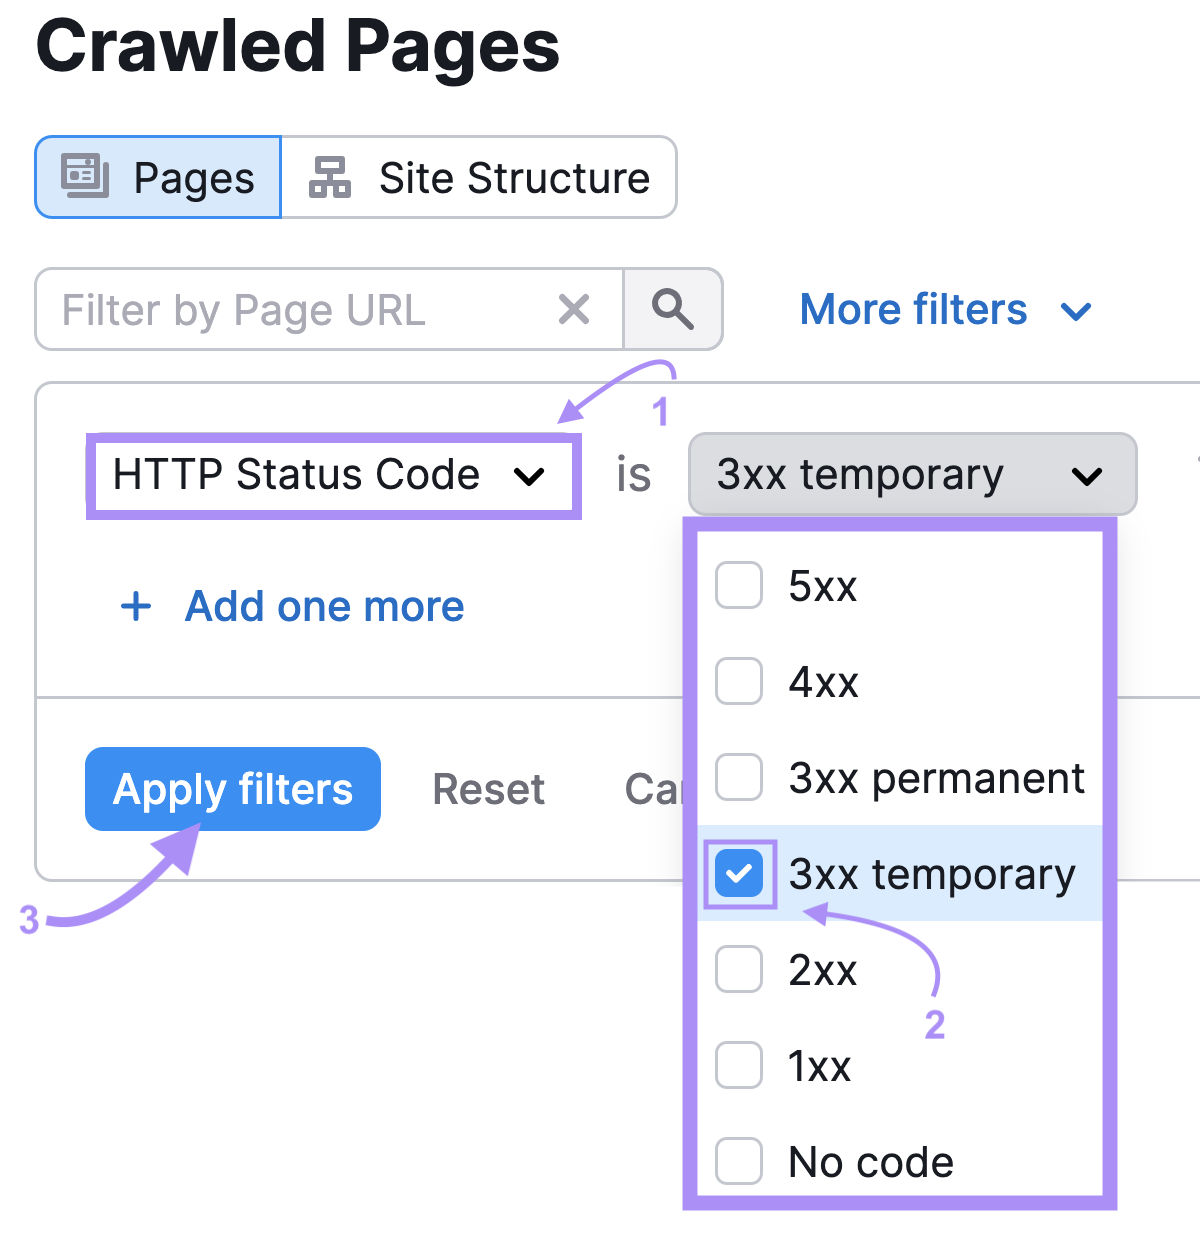 "3xx temporary" status code selected under "HTTPS Status Code" filter under "Crawled Pages" report